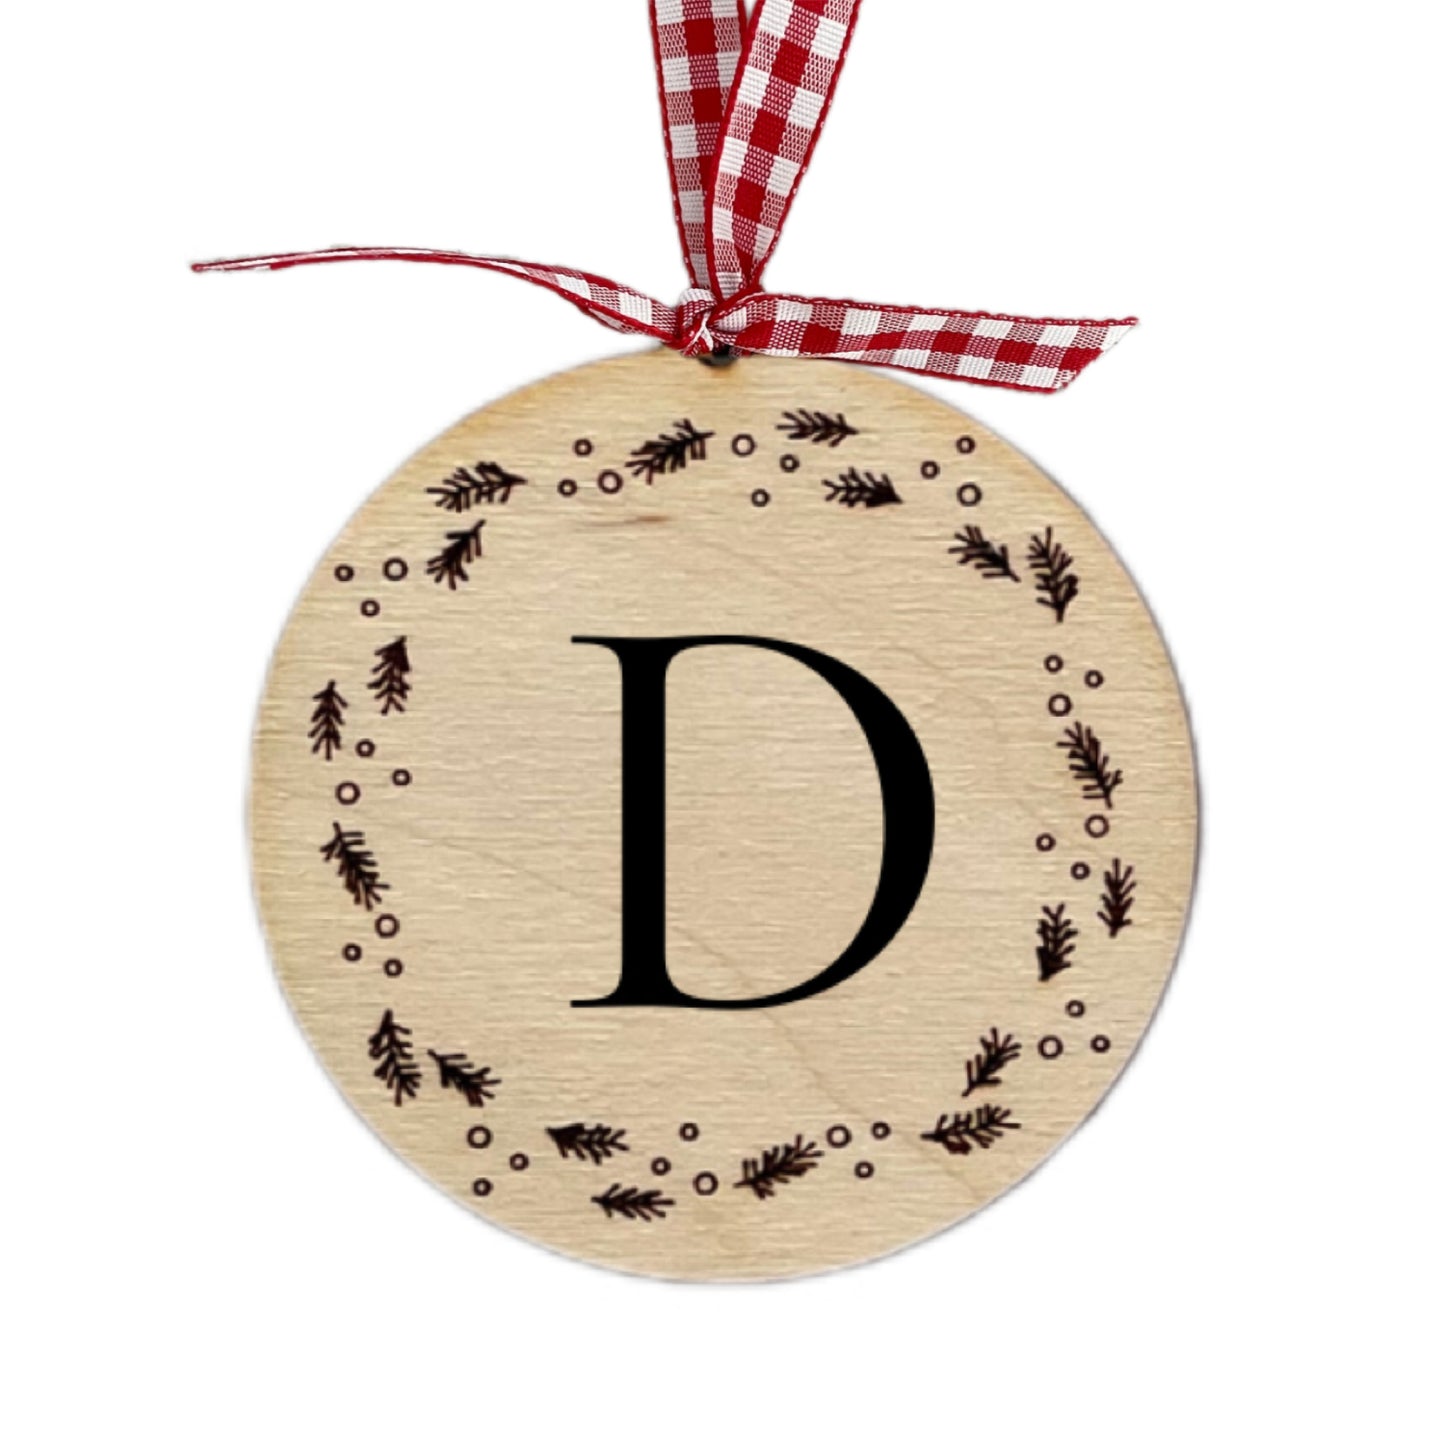 Customizable Pine Needle and Snow Ornament